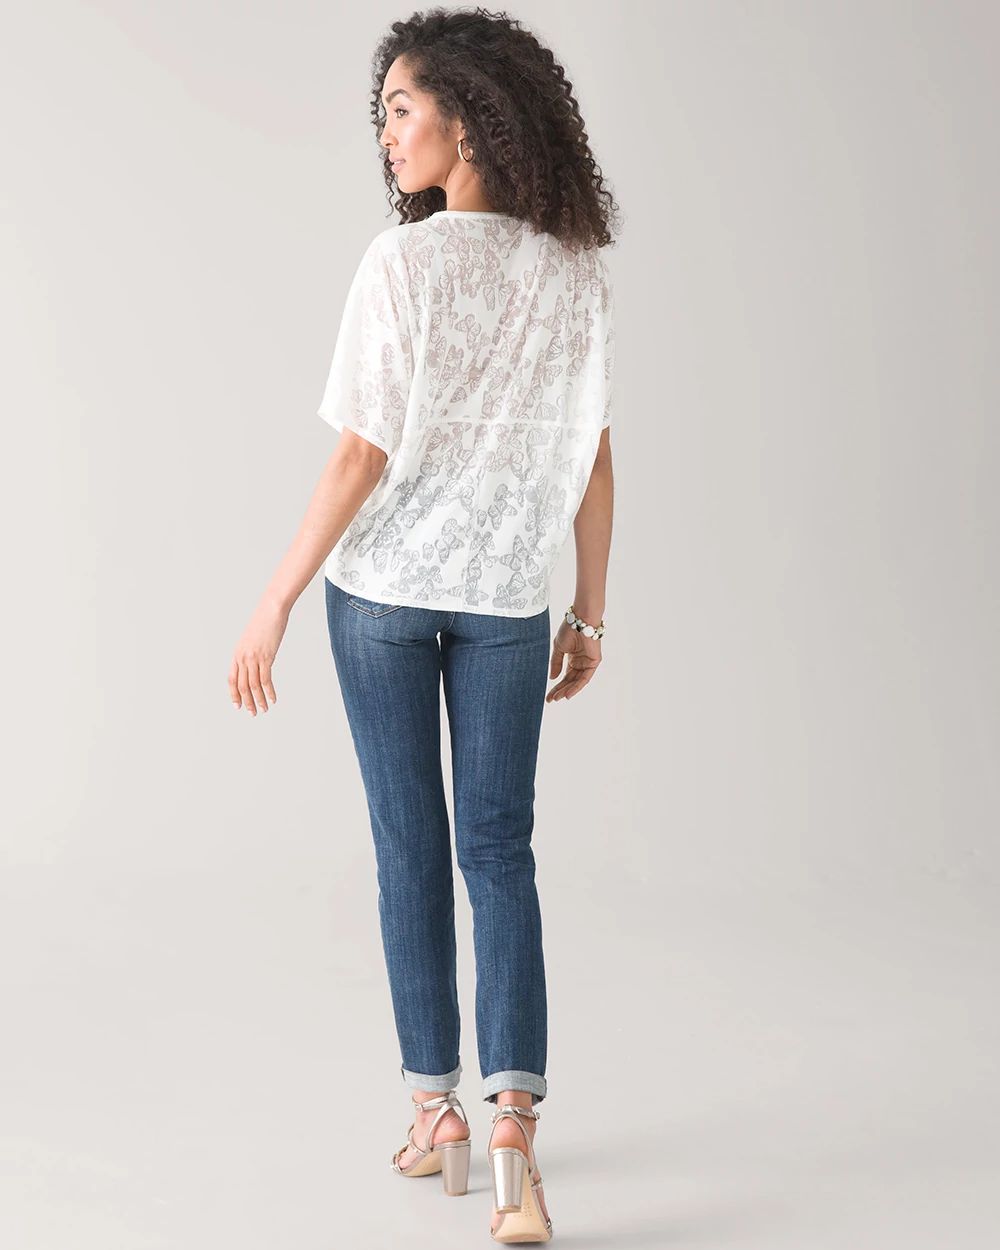 Everyday Dolman Tee click to view larger image.